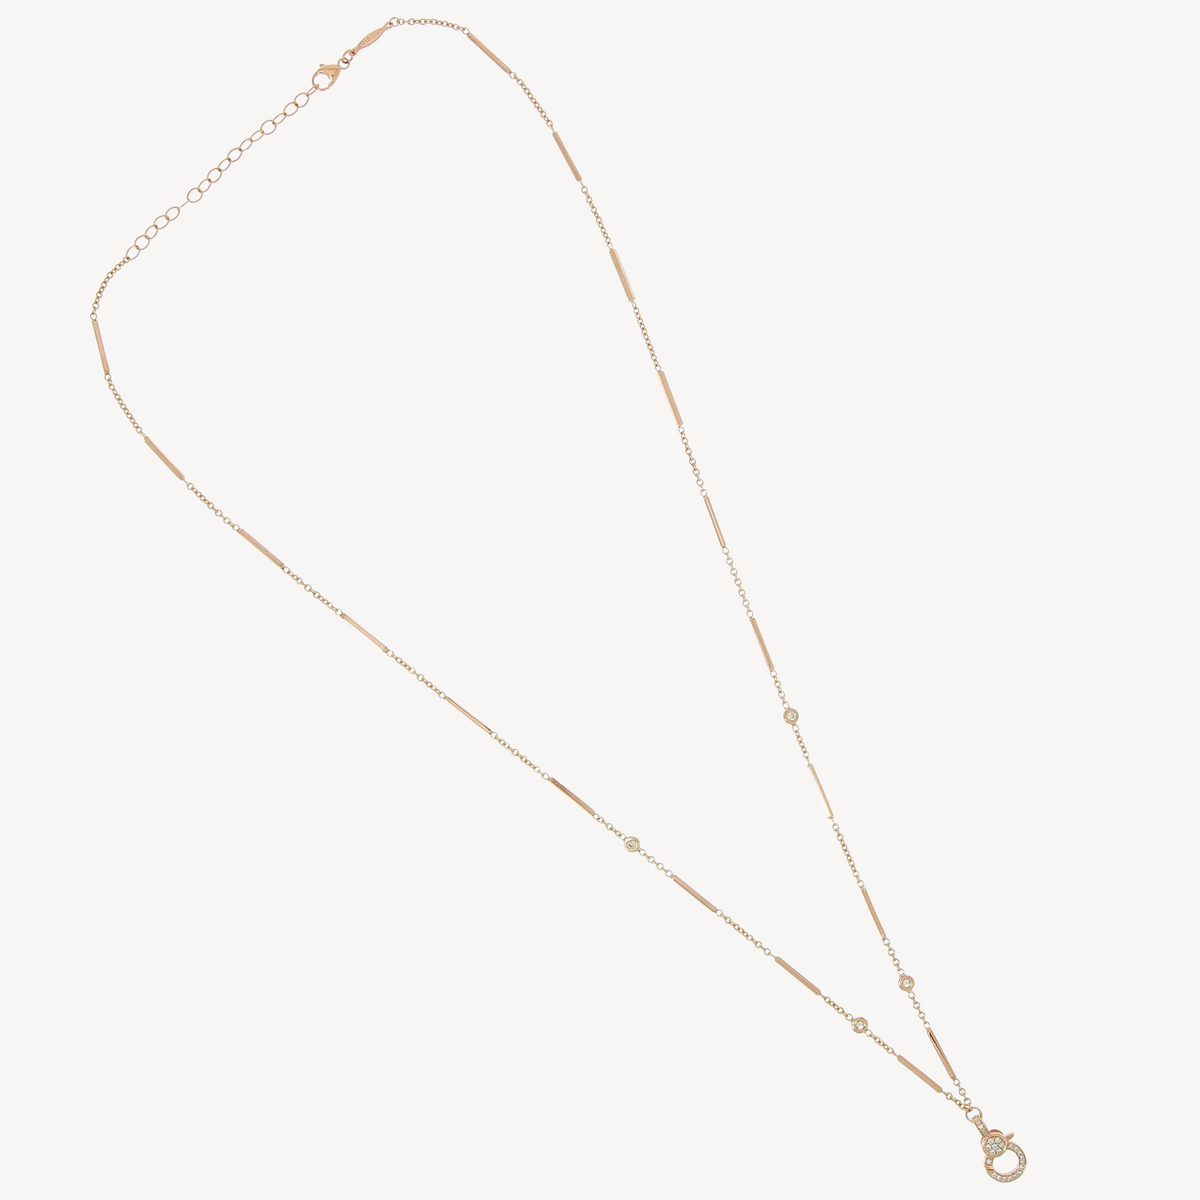 Rose gold necklace with pave diamond charm